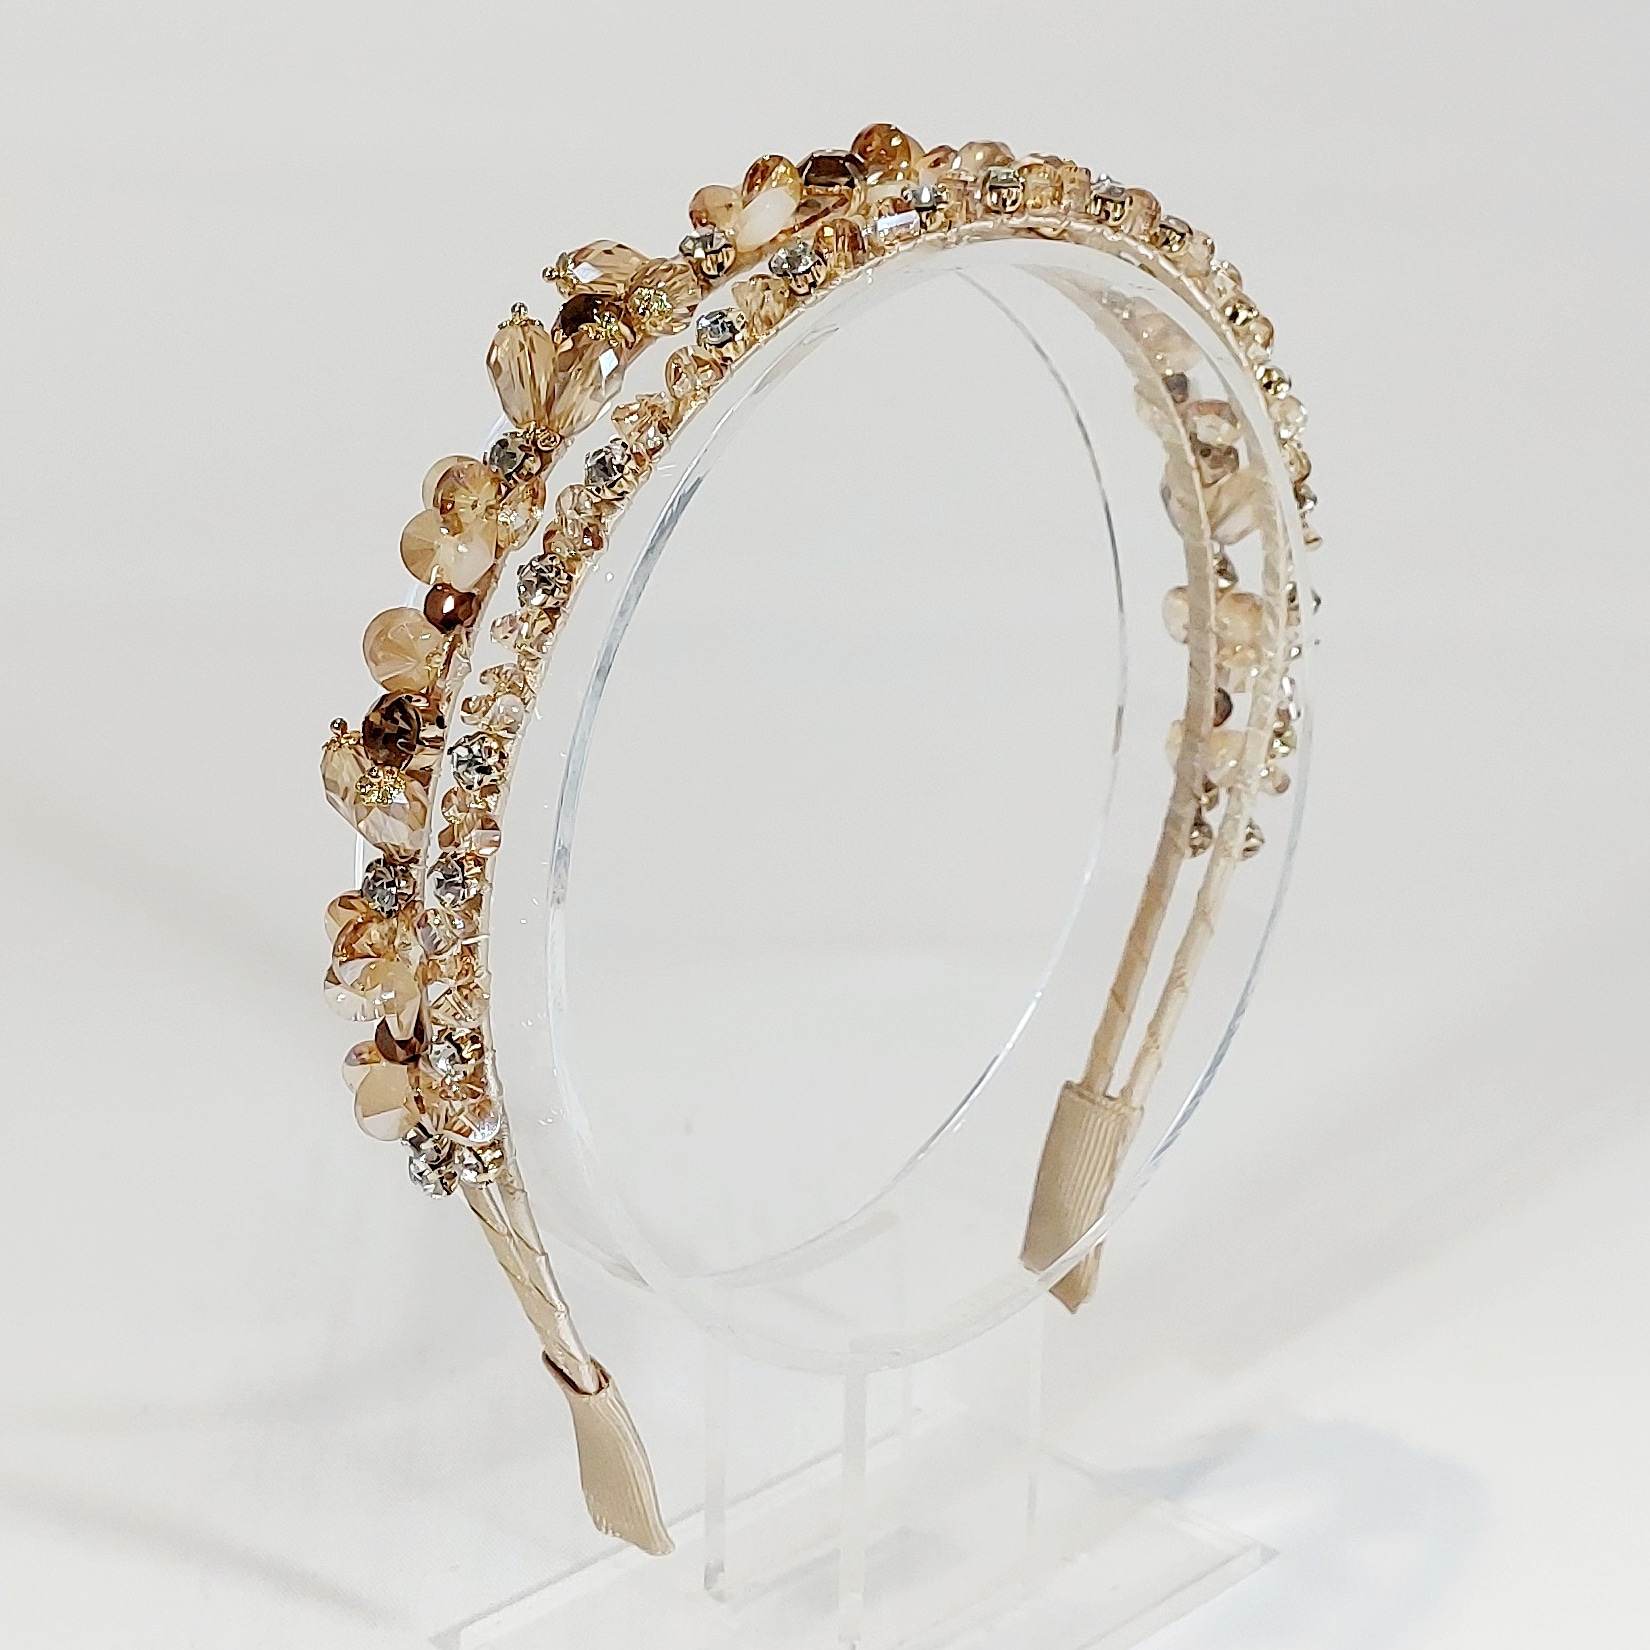 champagne crystal headpiece for the races and weddings from the divalicious candyland collection